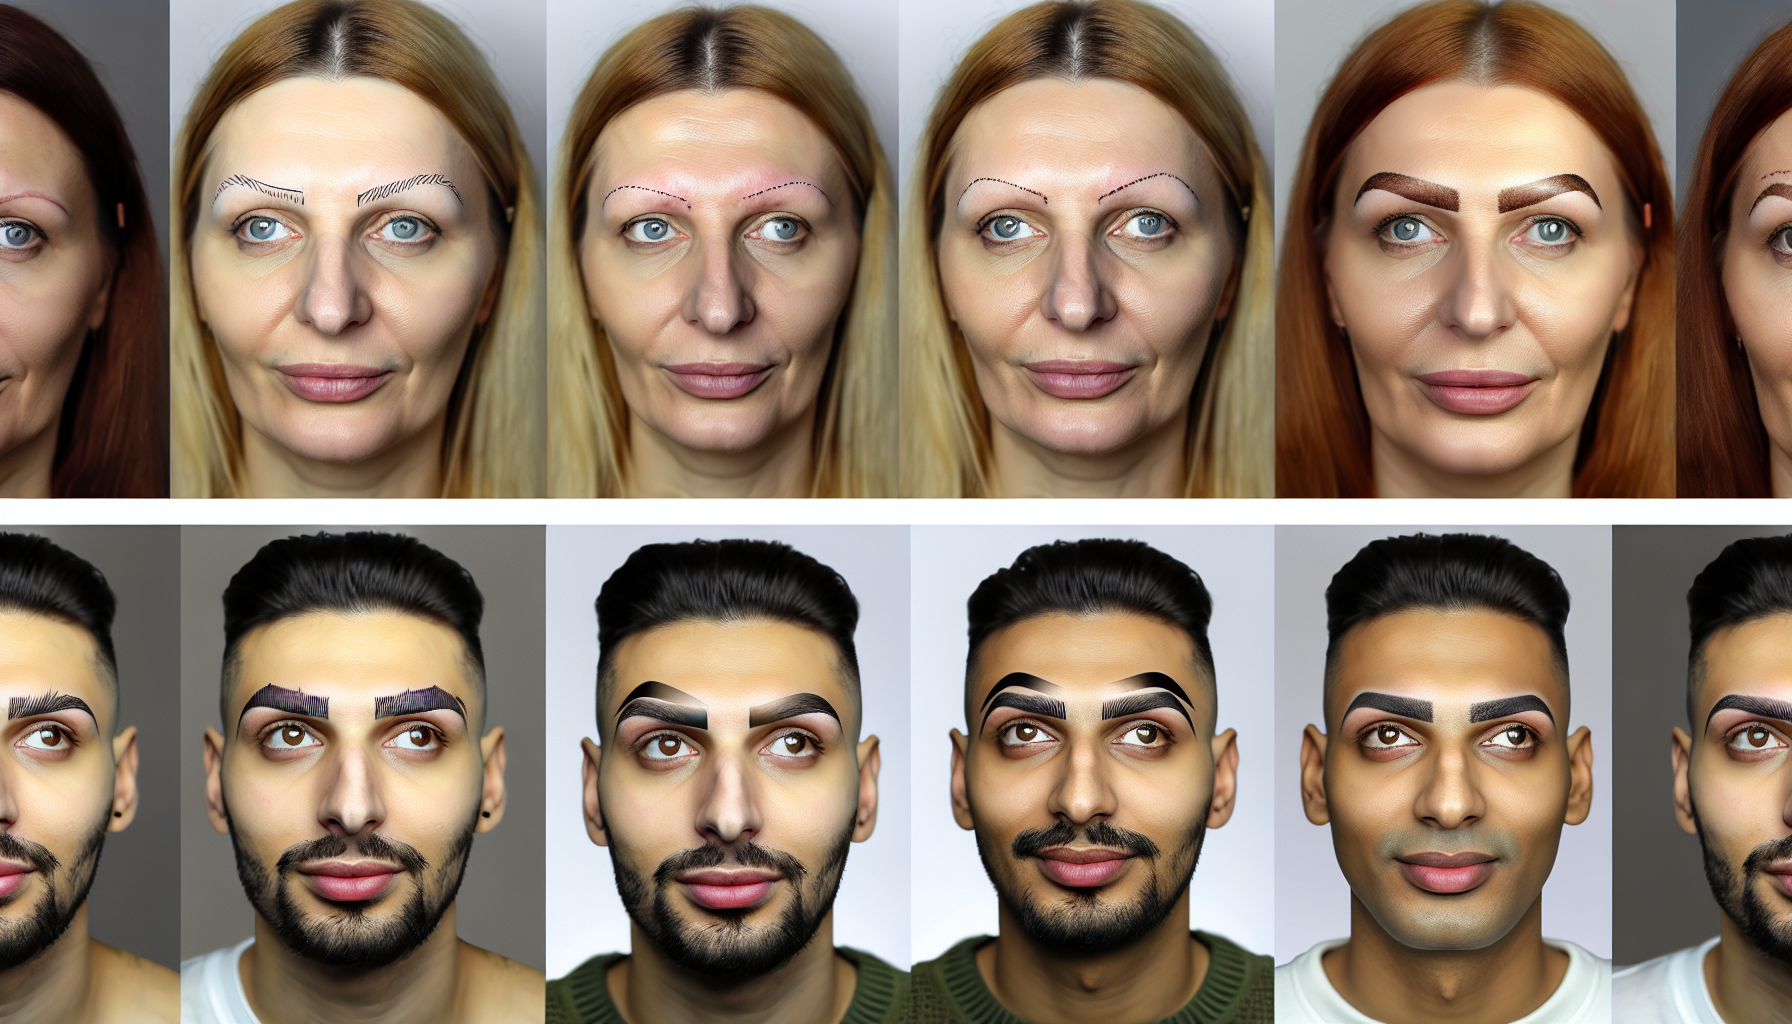 Before and after images of eyebrow transformations using stencils